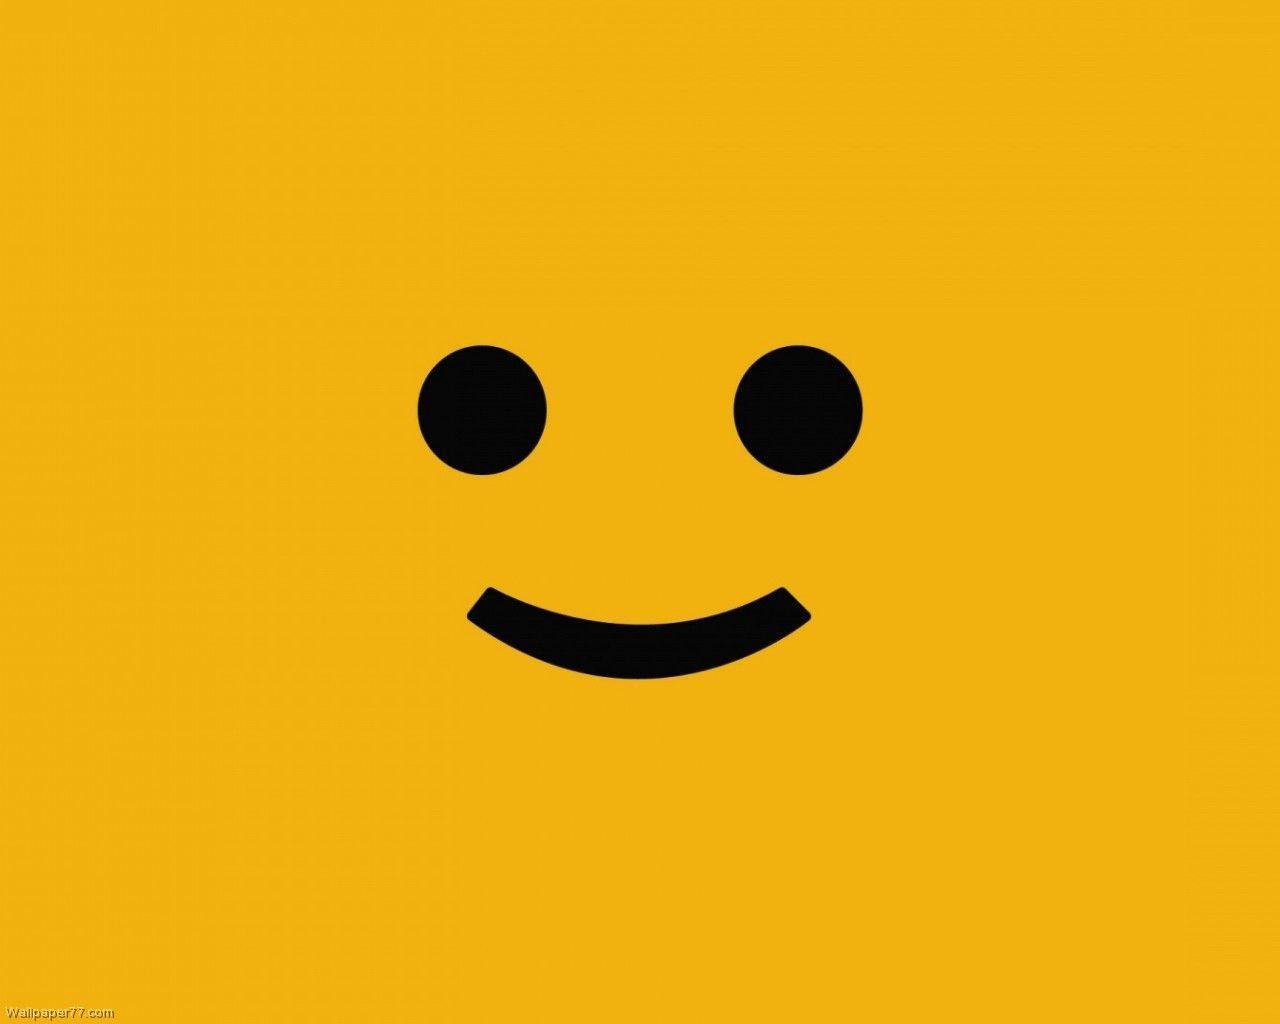 Smiley face background 1280×1024 pixels wallpaper tagged cute fun